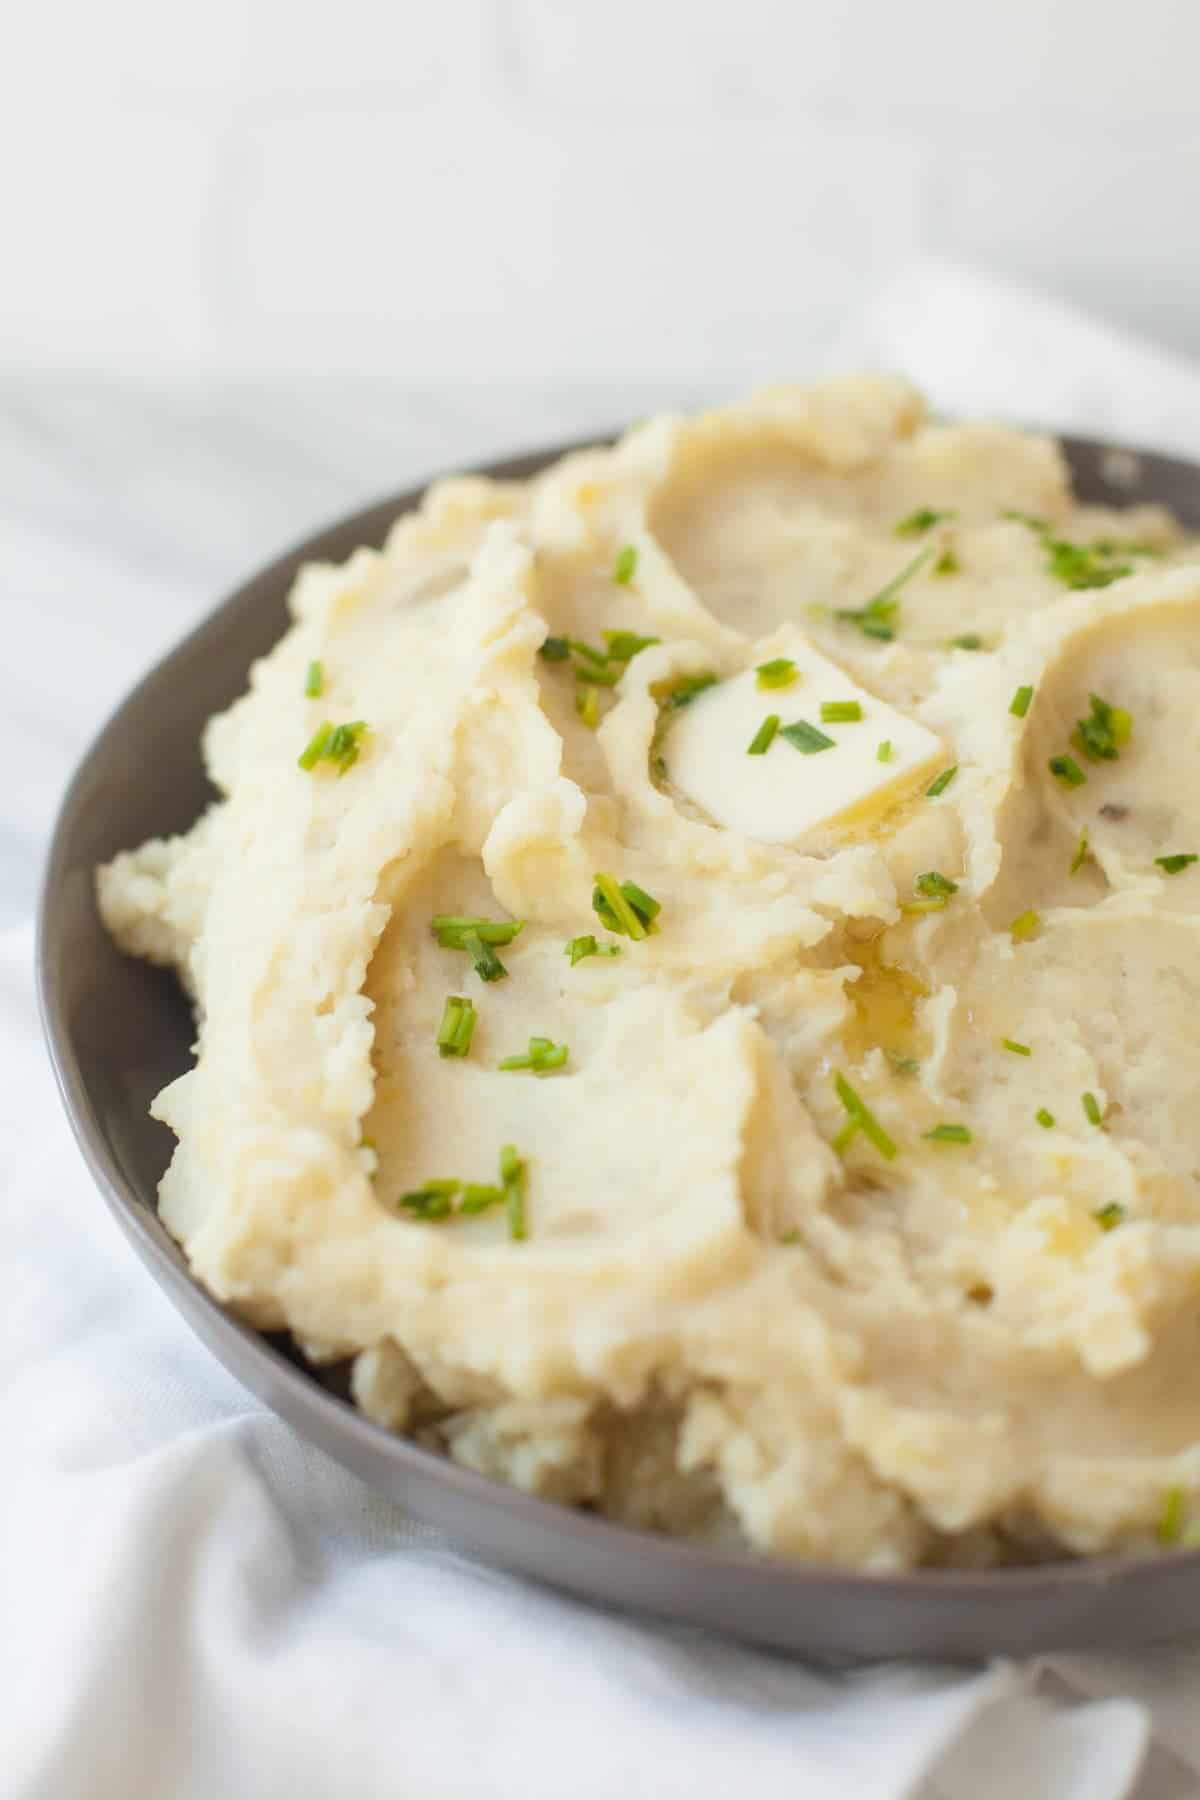 The Best Mashed Potatoes
 The Best Ever Slow Cooker Mashed Potatoes Wholefully